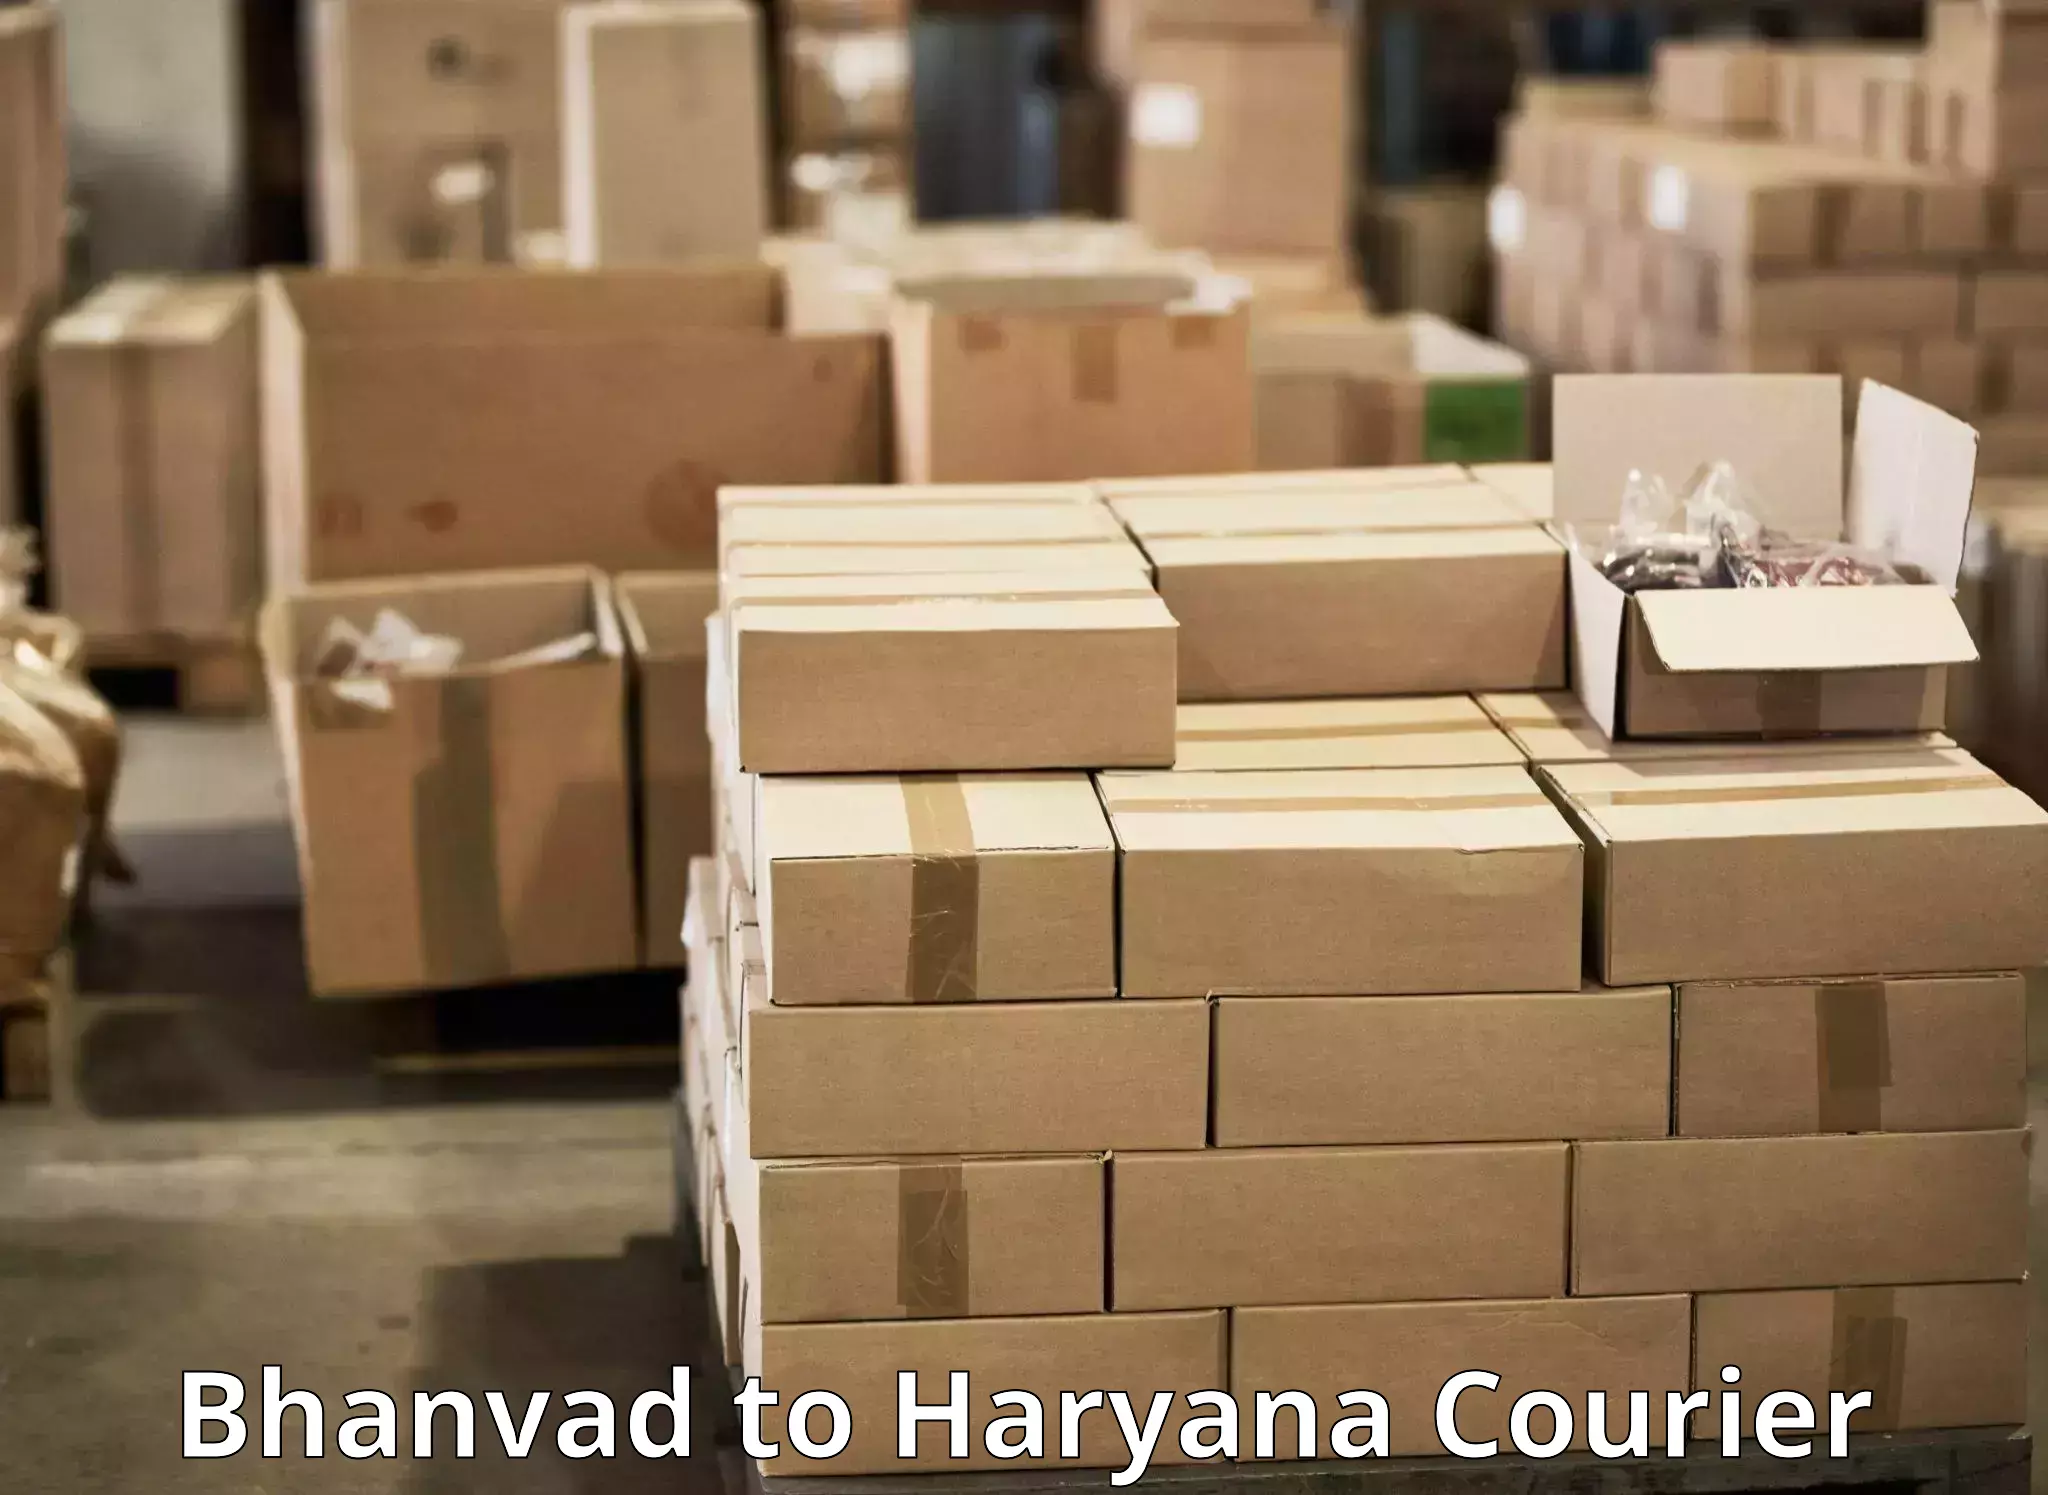 Small parcel delivery Bhanvad to Chaudhary Charan Singh Haryana Agricultural University Hisar